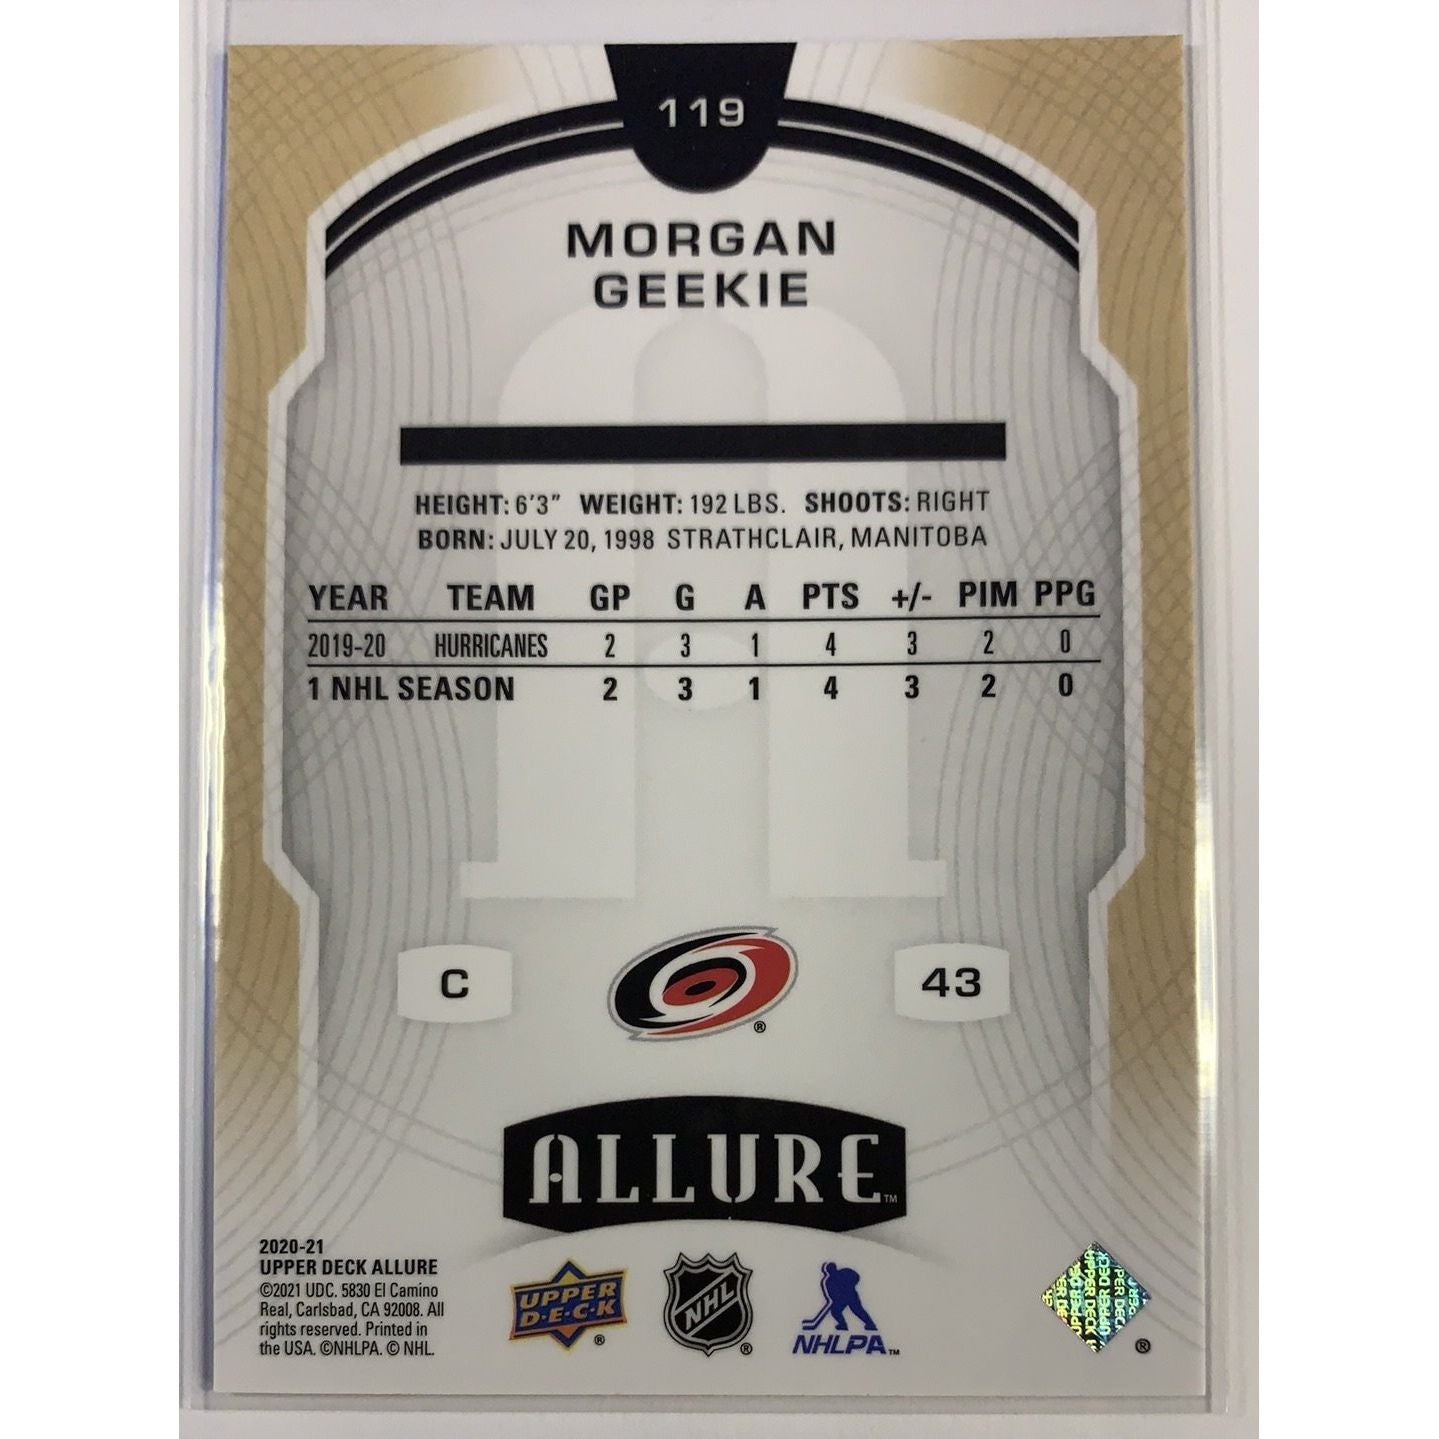  2020-21 Allure Morgan Geekie Rookie Card  Local Legends Cards & Collectibles